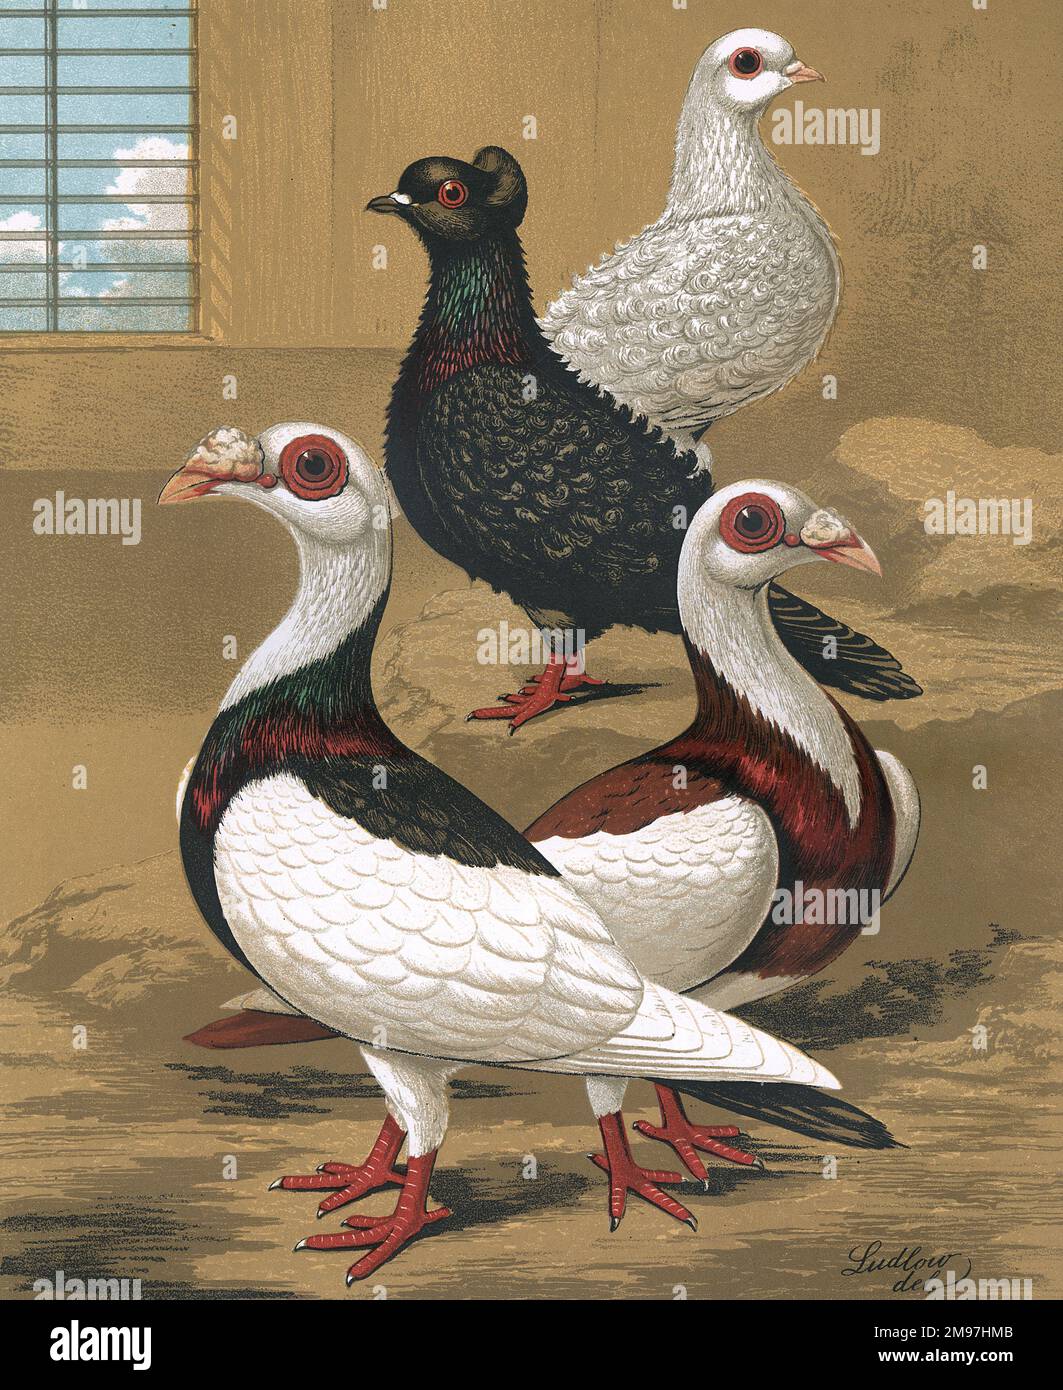 A portait illustrating two Frill-Back and two Scandaroon pigeons. Both breeds are domesticated and a breed of fancy pigeon. The two varieties of Frill-Backs, the crest and plain-headed, are illustrated in full-length to show their frill or curls on the wing shield feathers and feet. The Scandaroons, also known as 'Nuremberg Bagdads' are illustrated to show their varied pied colouration and prominent wattle on the nostril cere. Stock Photo